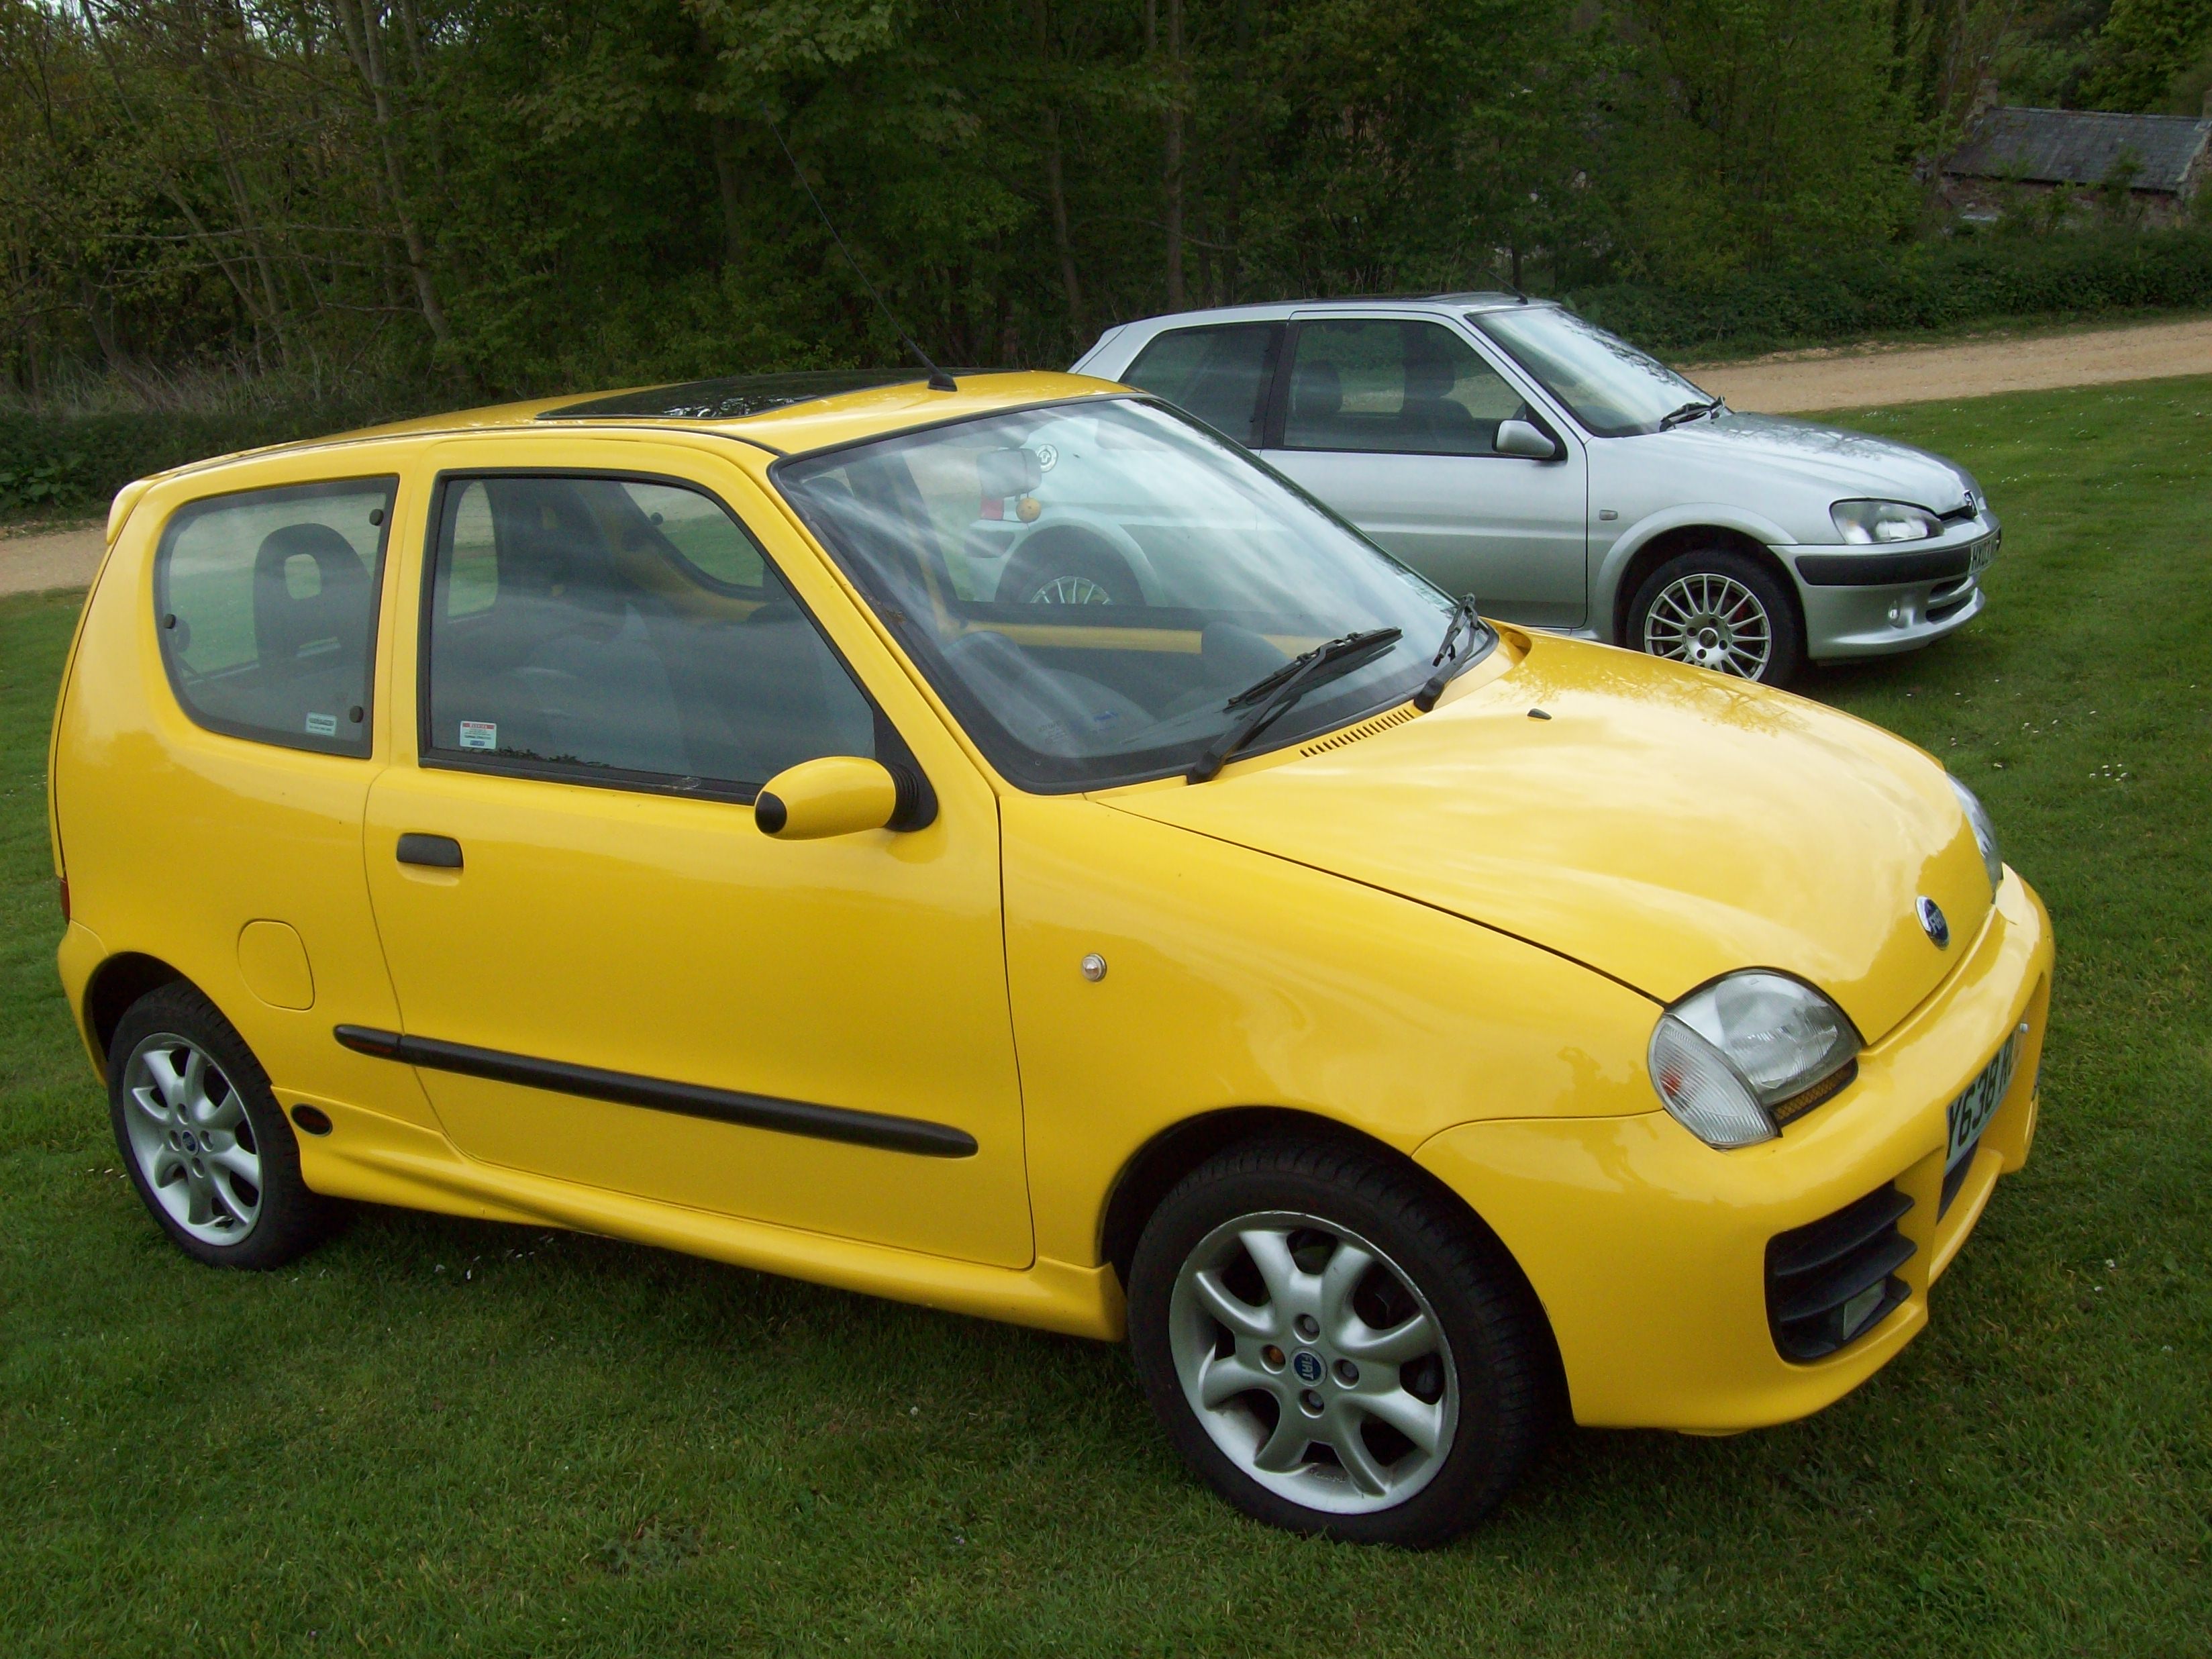 Barry Roo, my Seicento Sporting Schumacher (and my girlfriend's 106 Quiksil